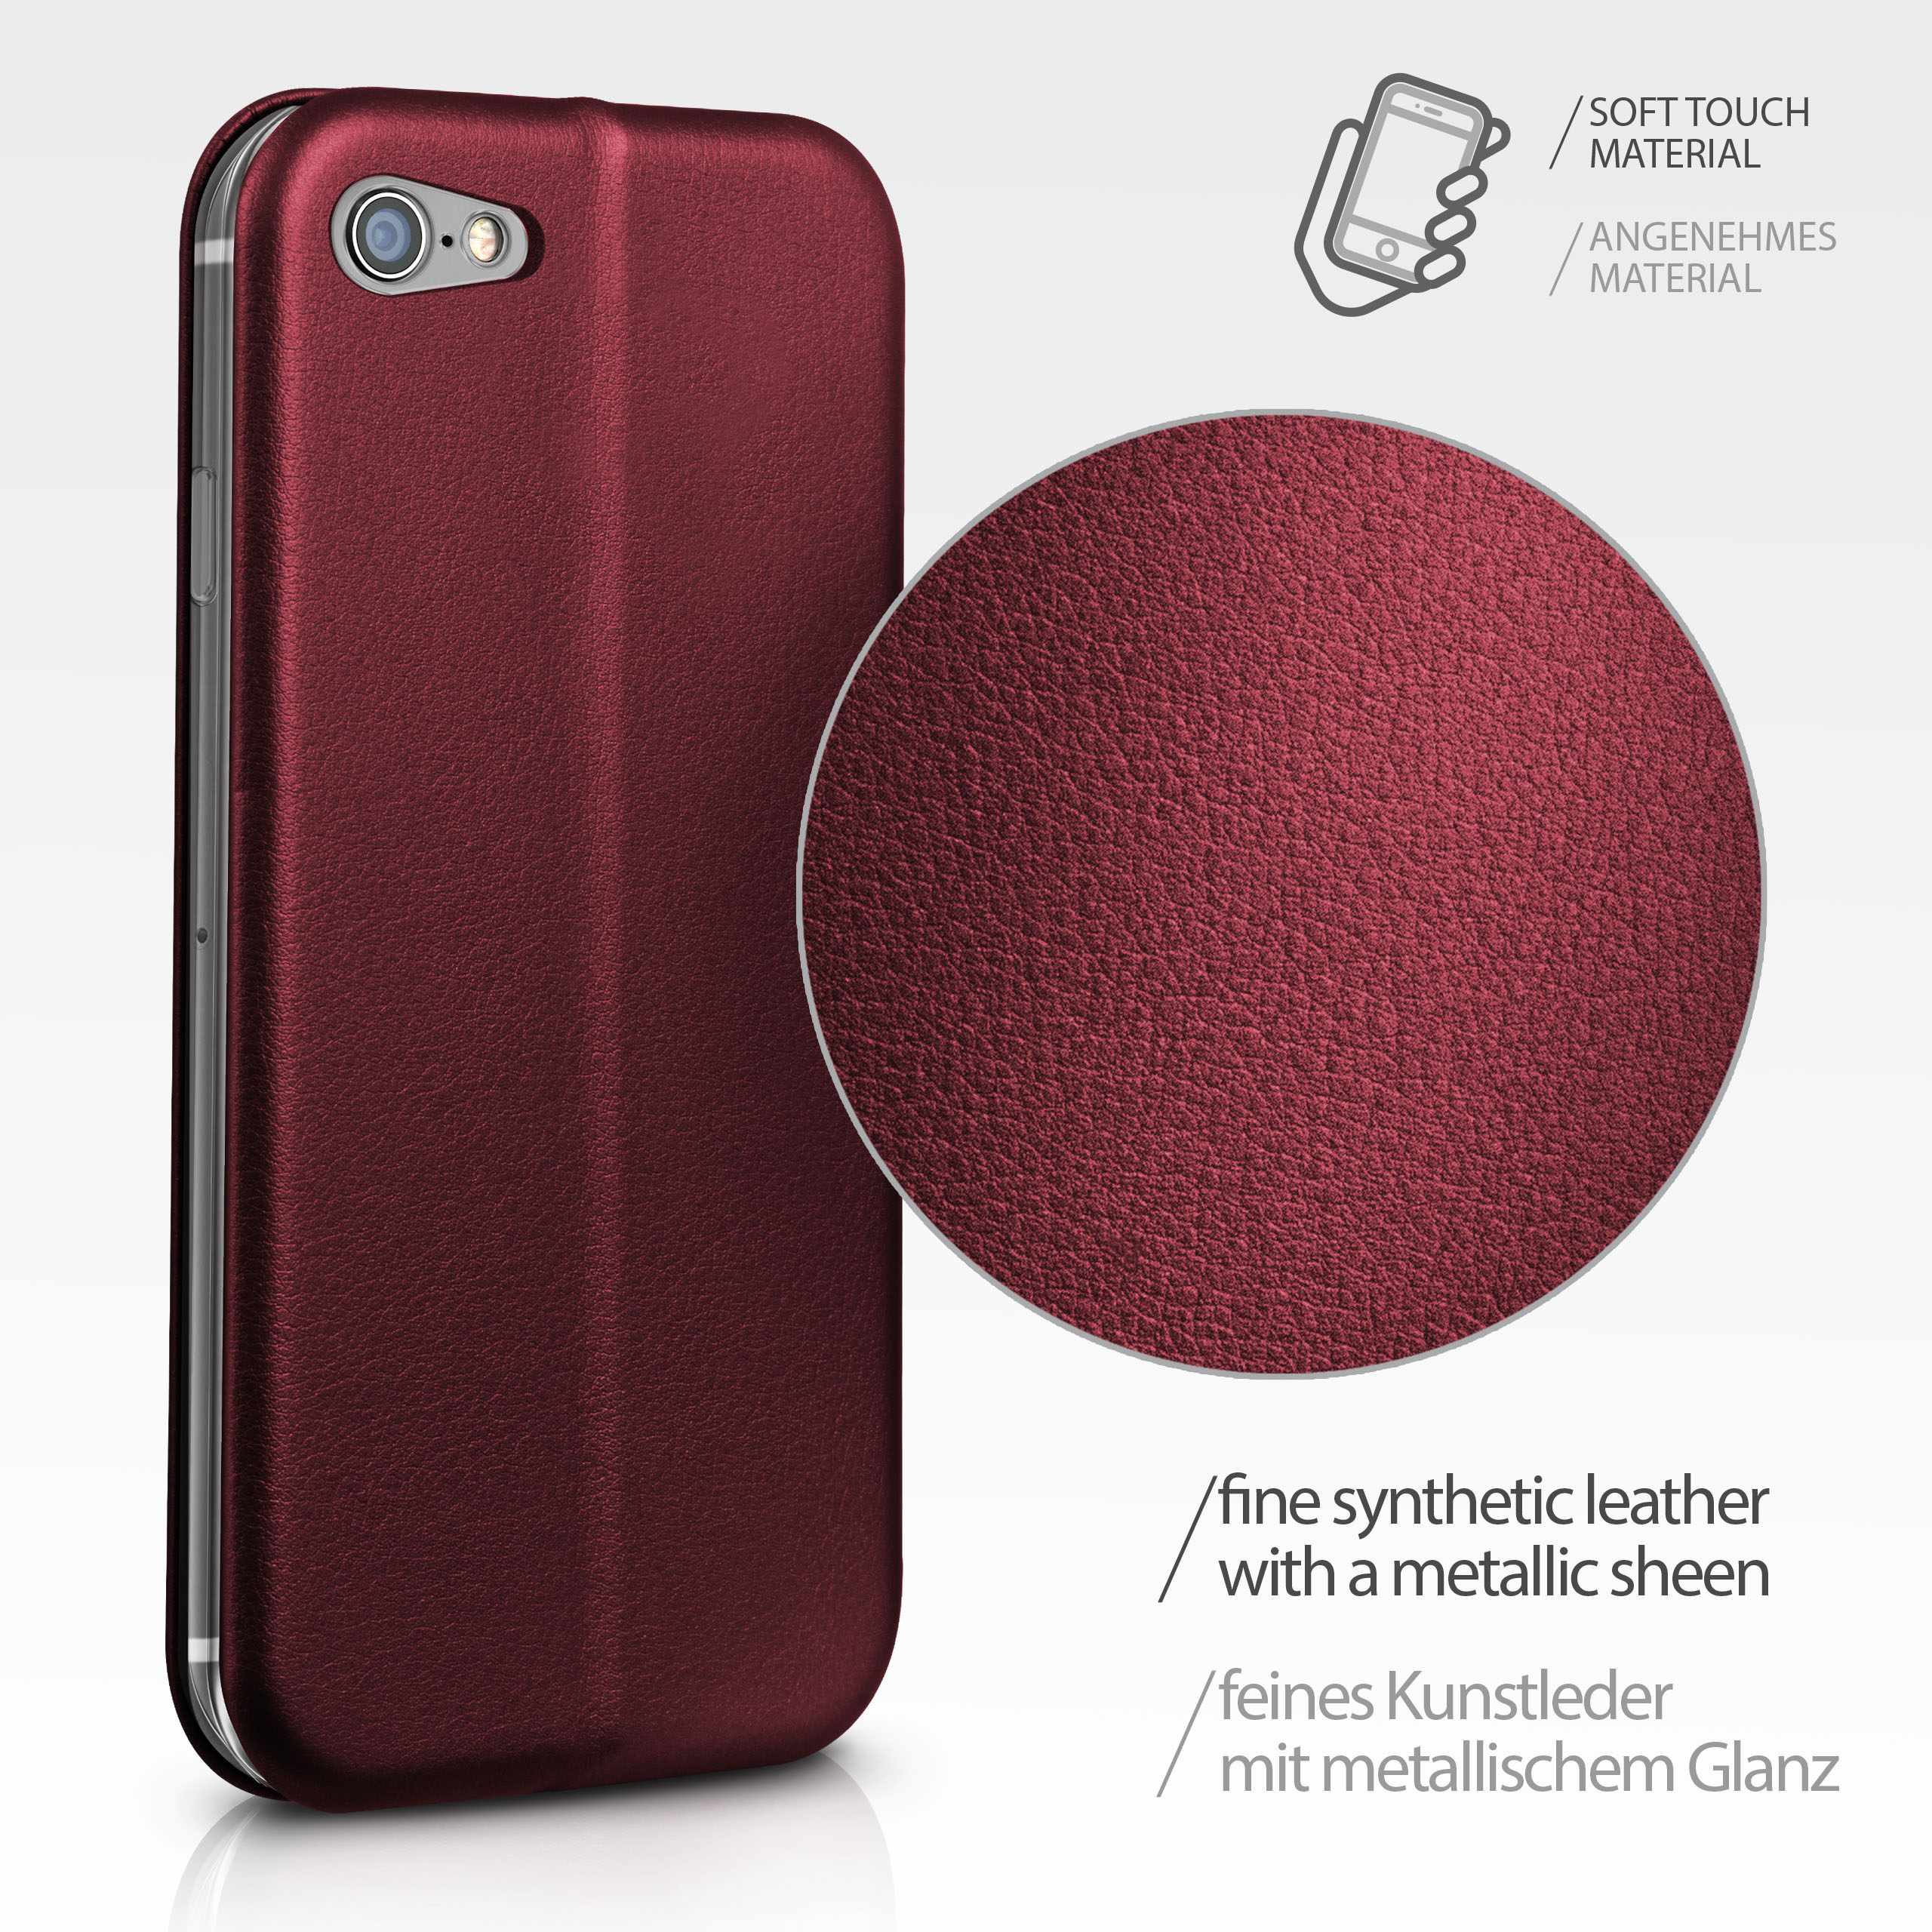 ONEFLOW Business Case, Flip 7 Apple, 8, Burgund Cover, / iPhone Red iPhone 